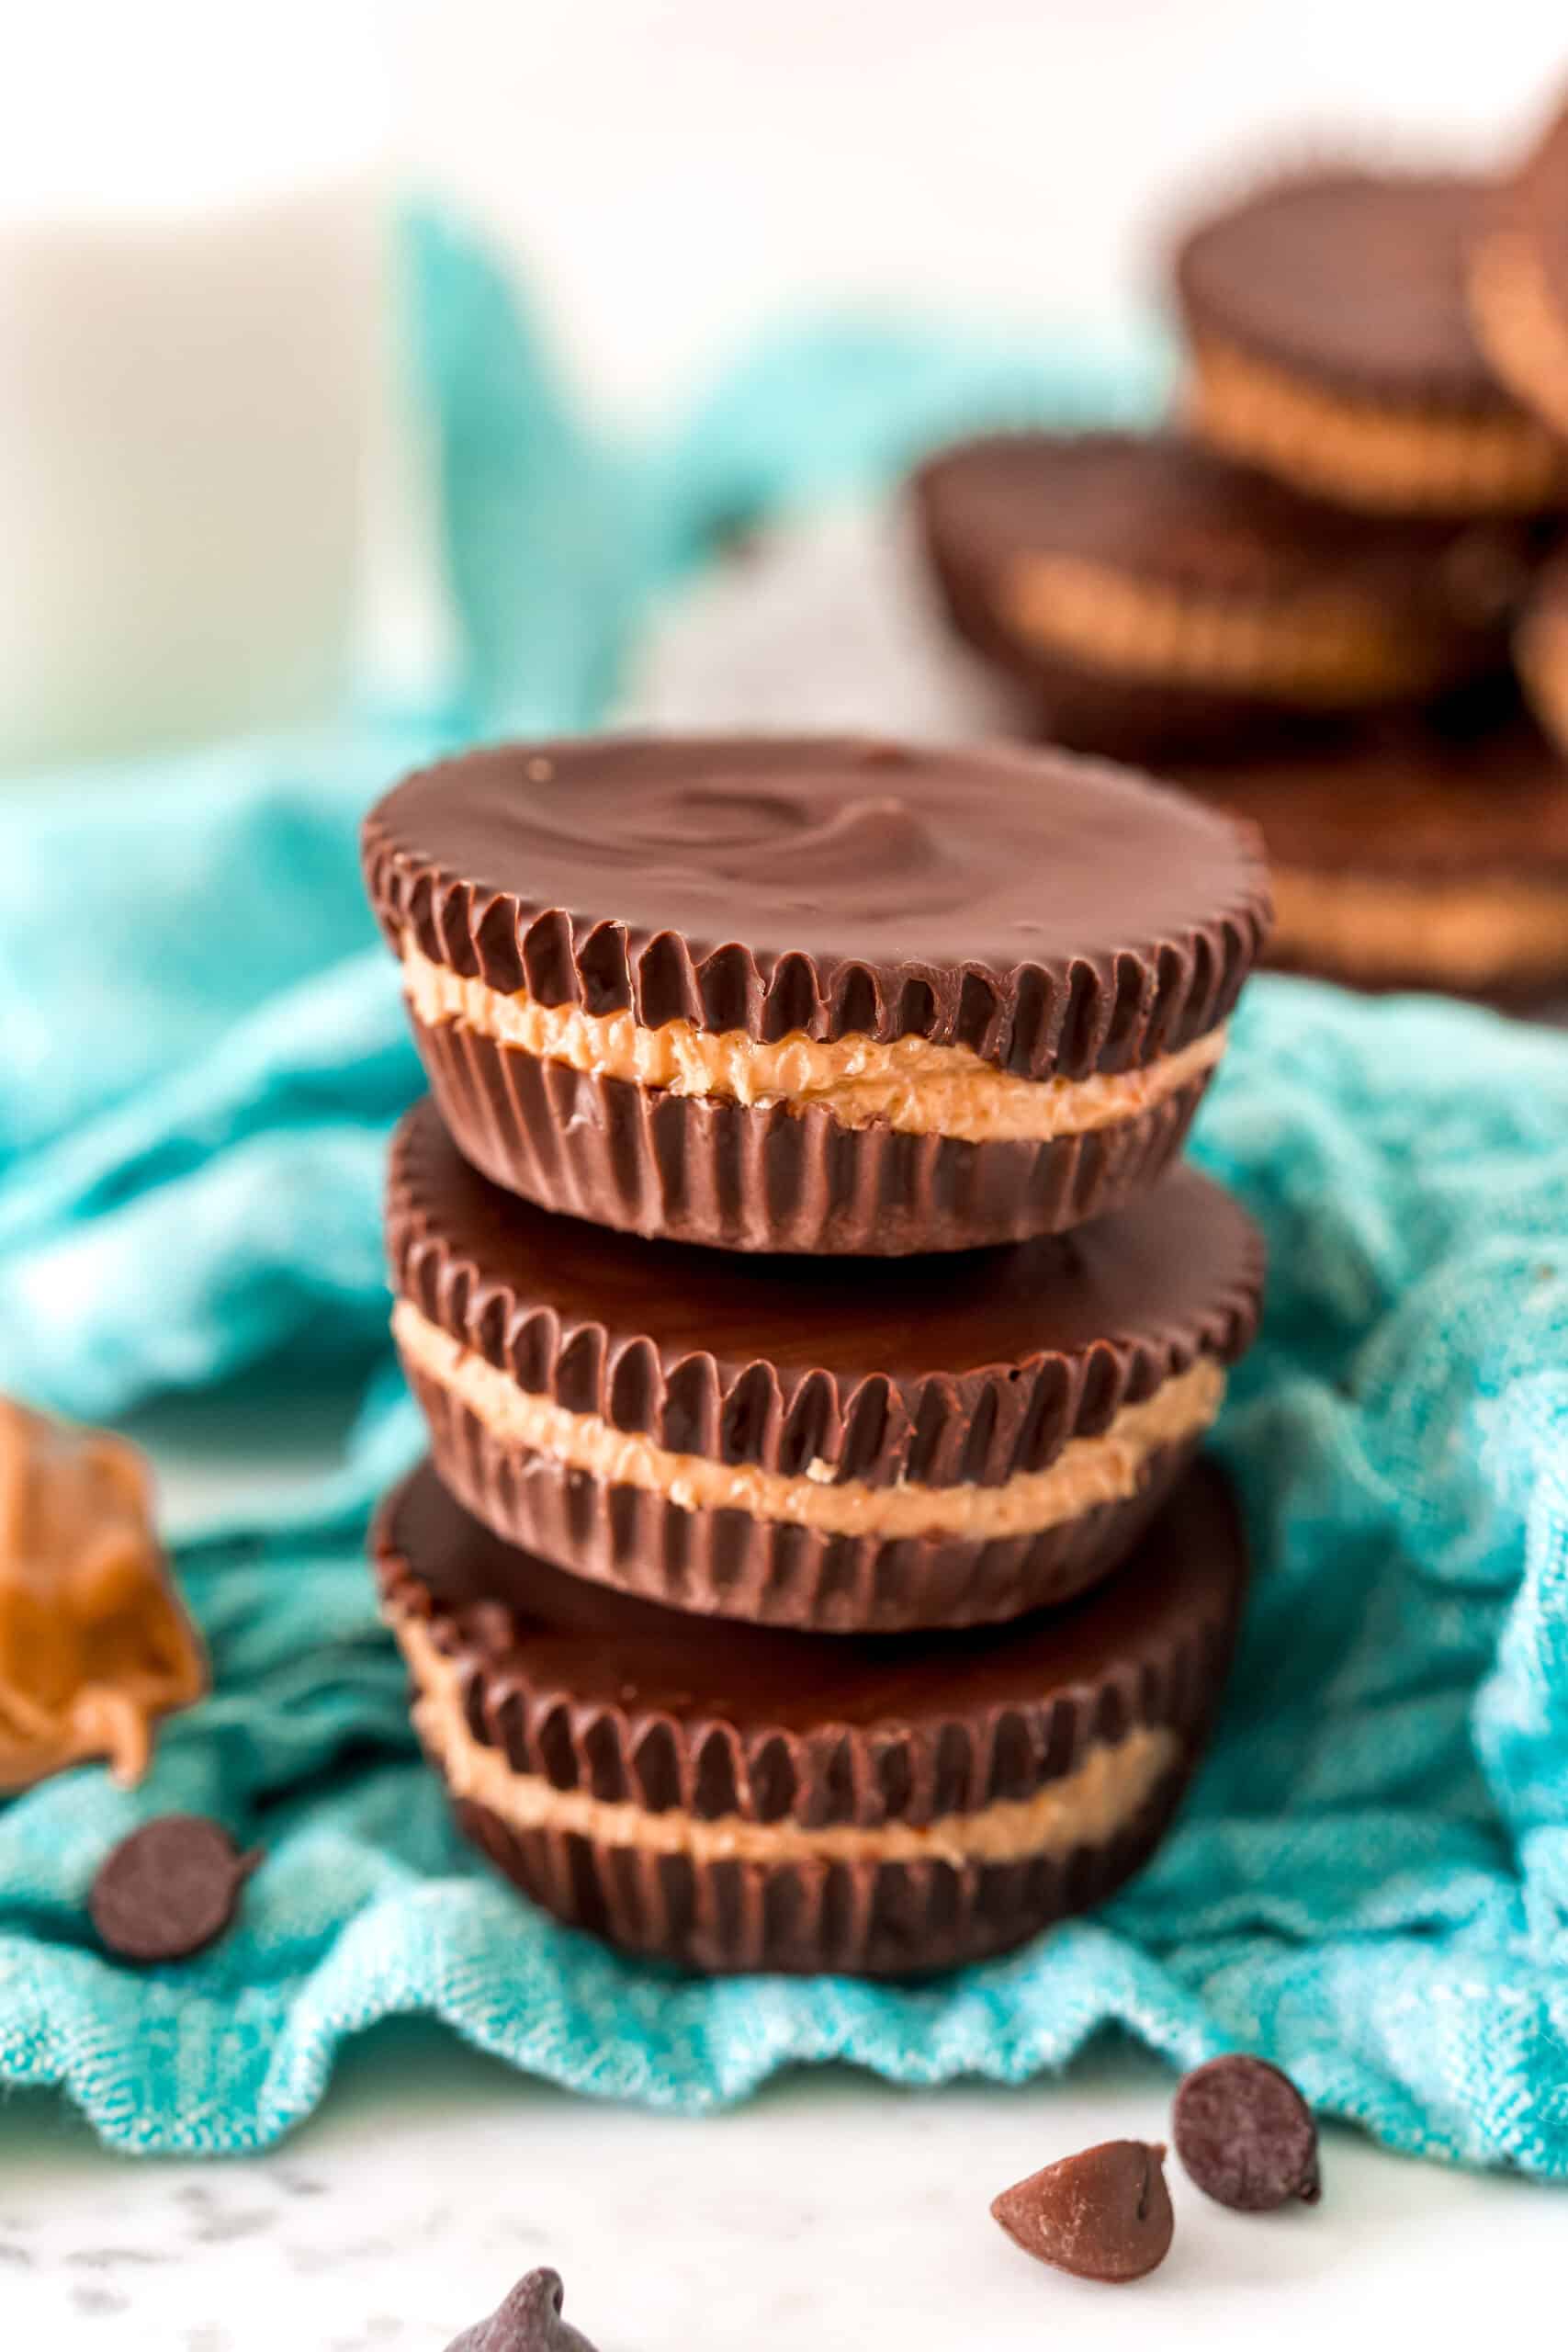 Stack of three homemade reeses peanut butter cups on a teal napkin.